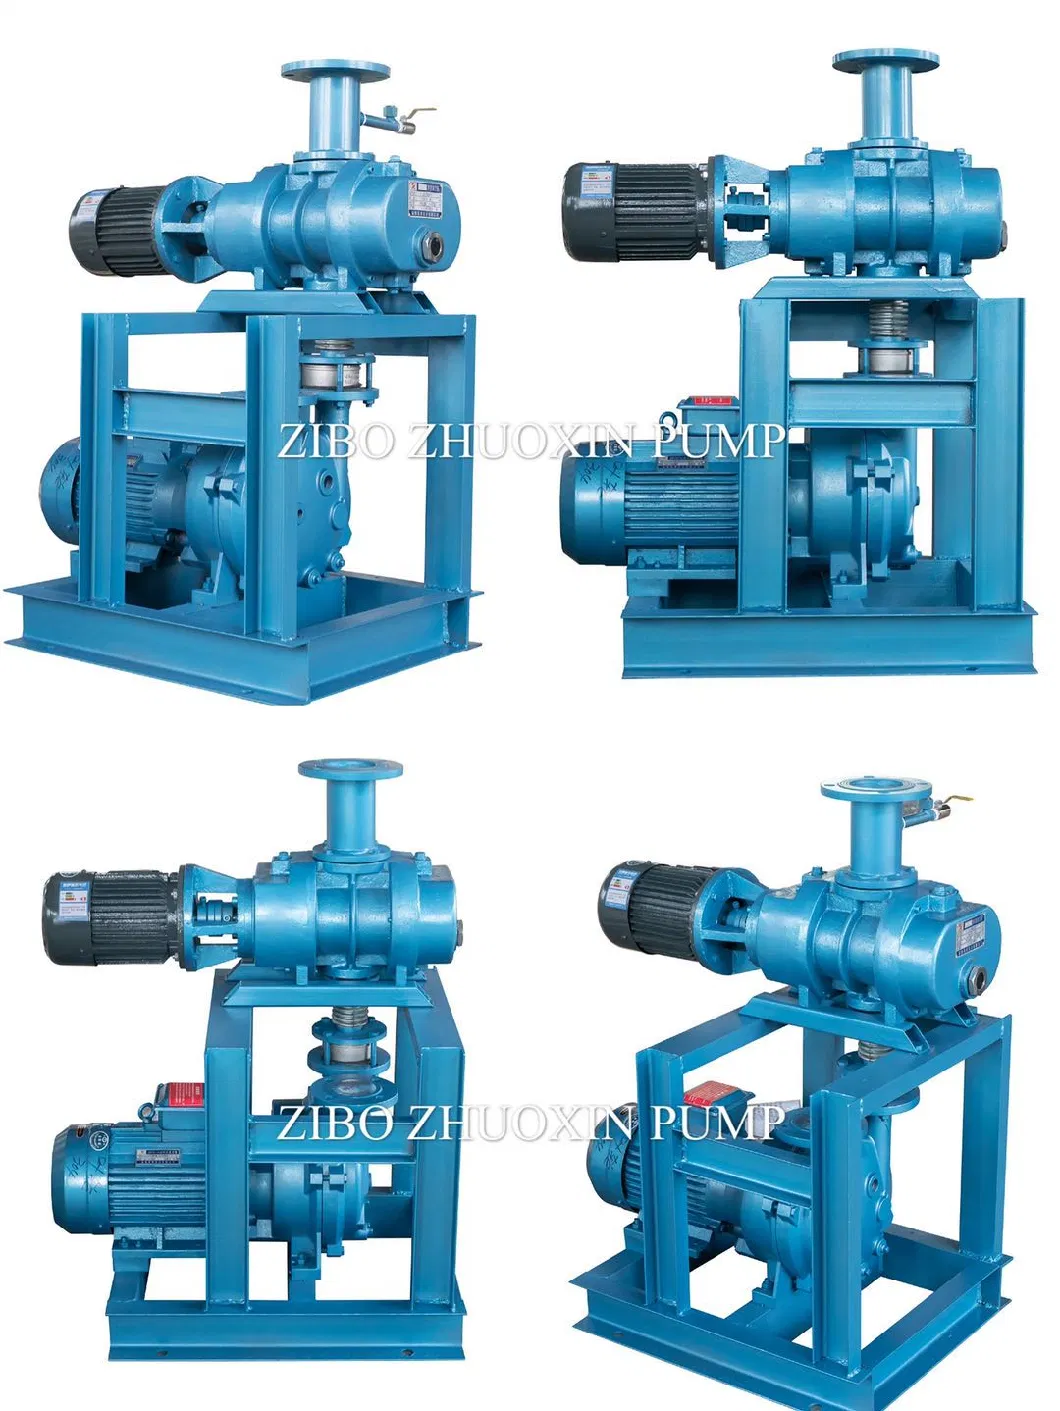 Zjzb2b Vacuum Pump Package Unit for Zhuoxin High Efficiency Low Noise